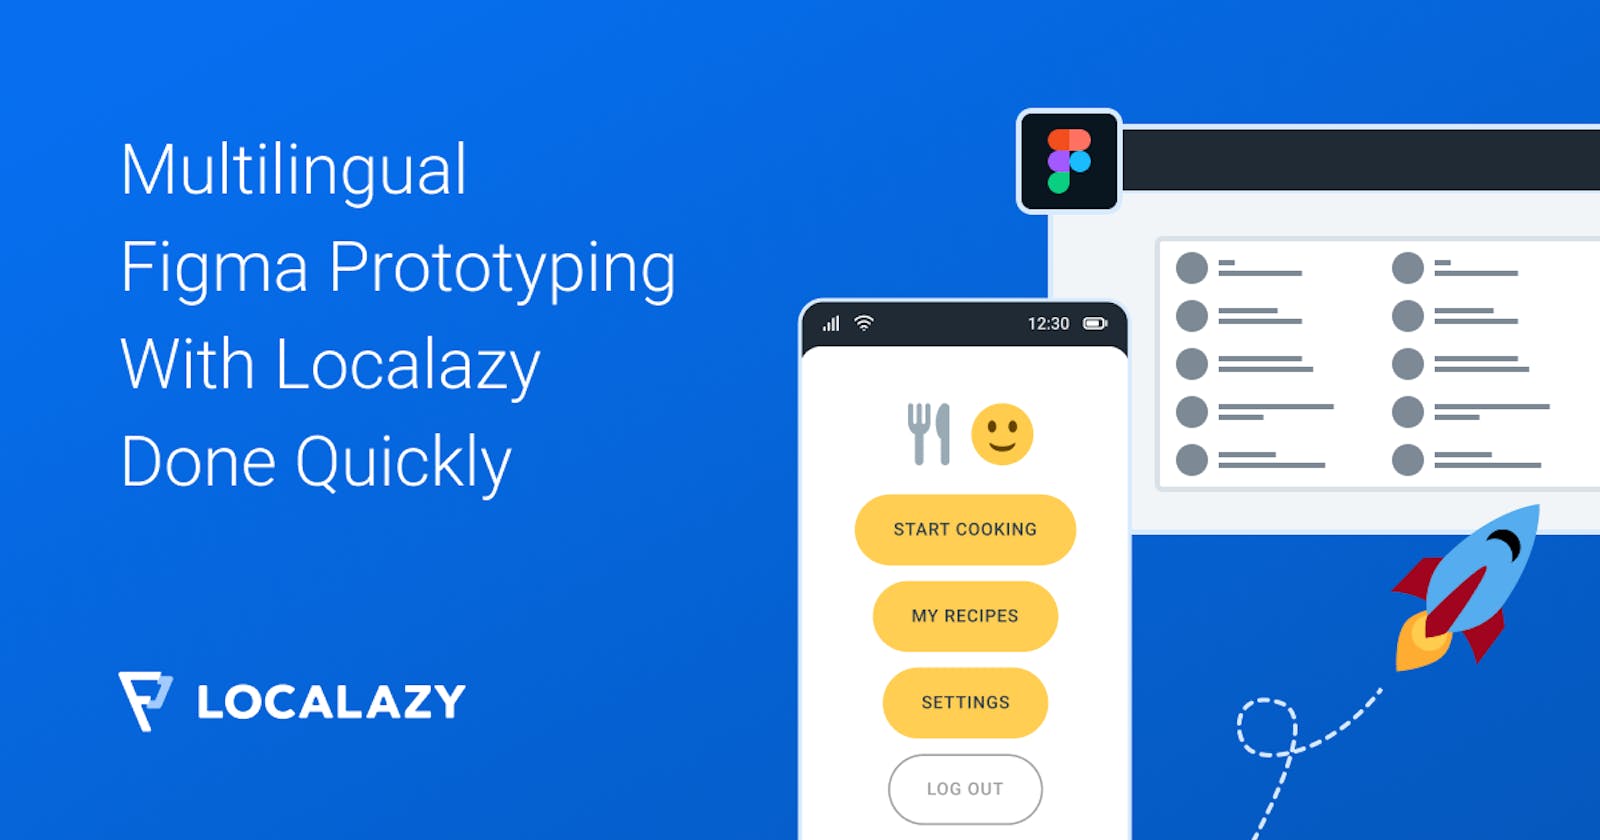 Multilingual Figma prototyping with Localazy done quickly